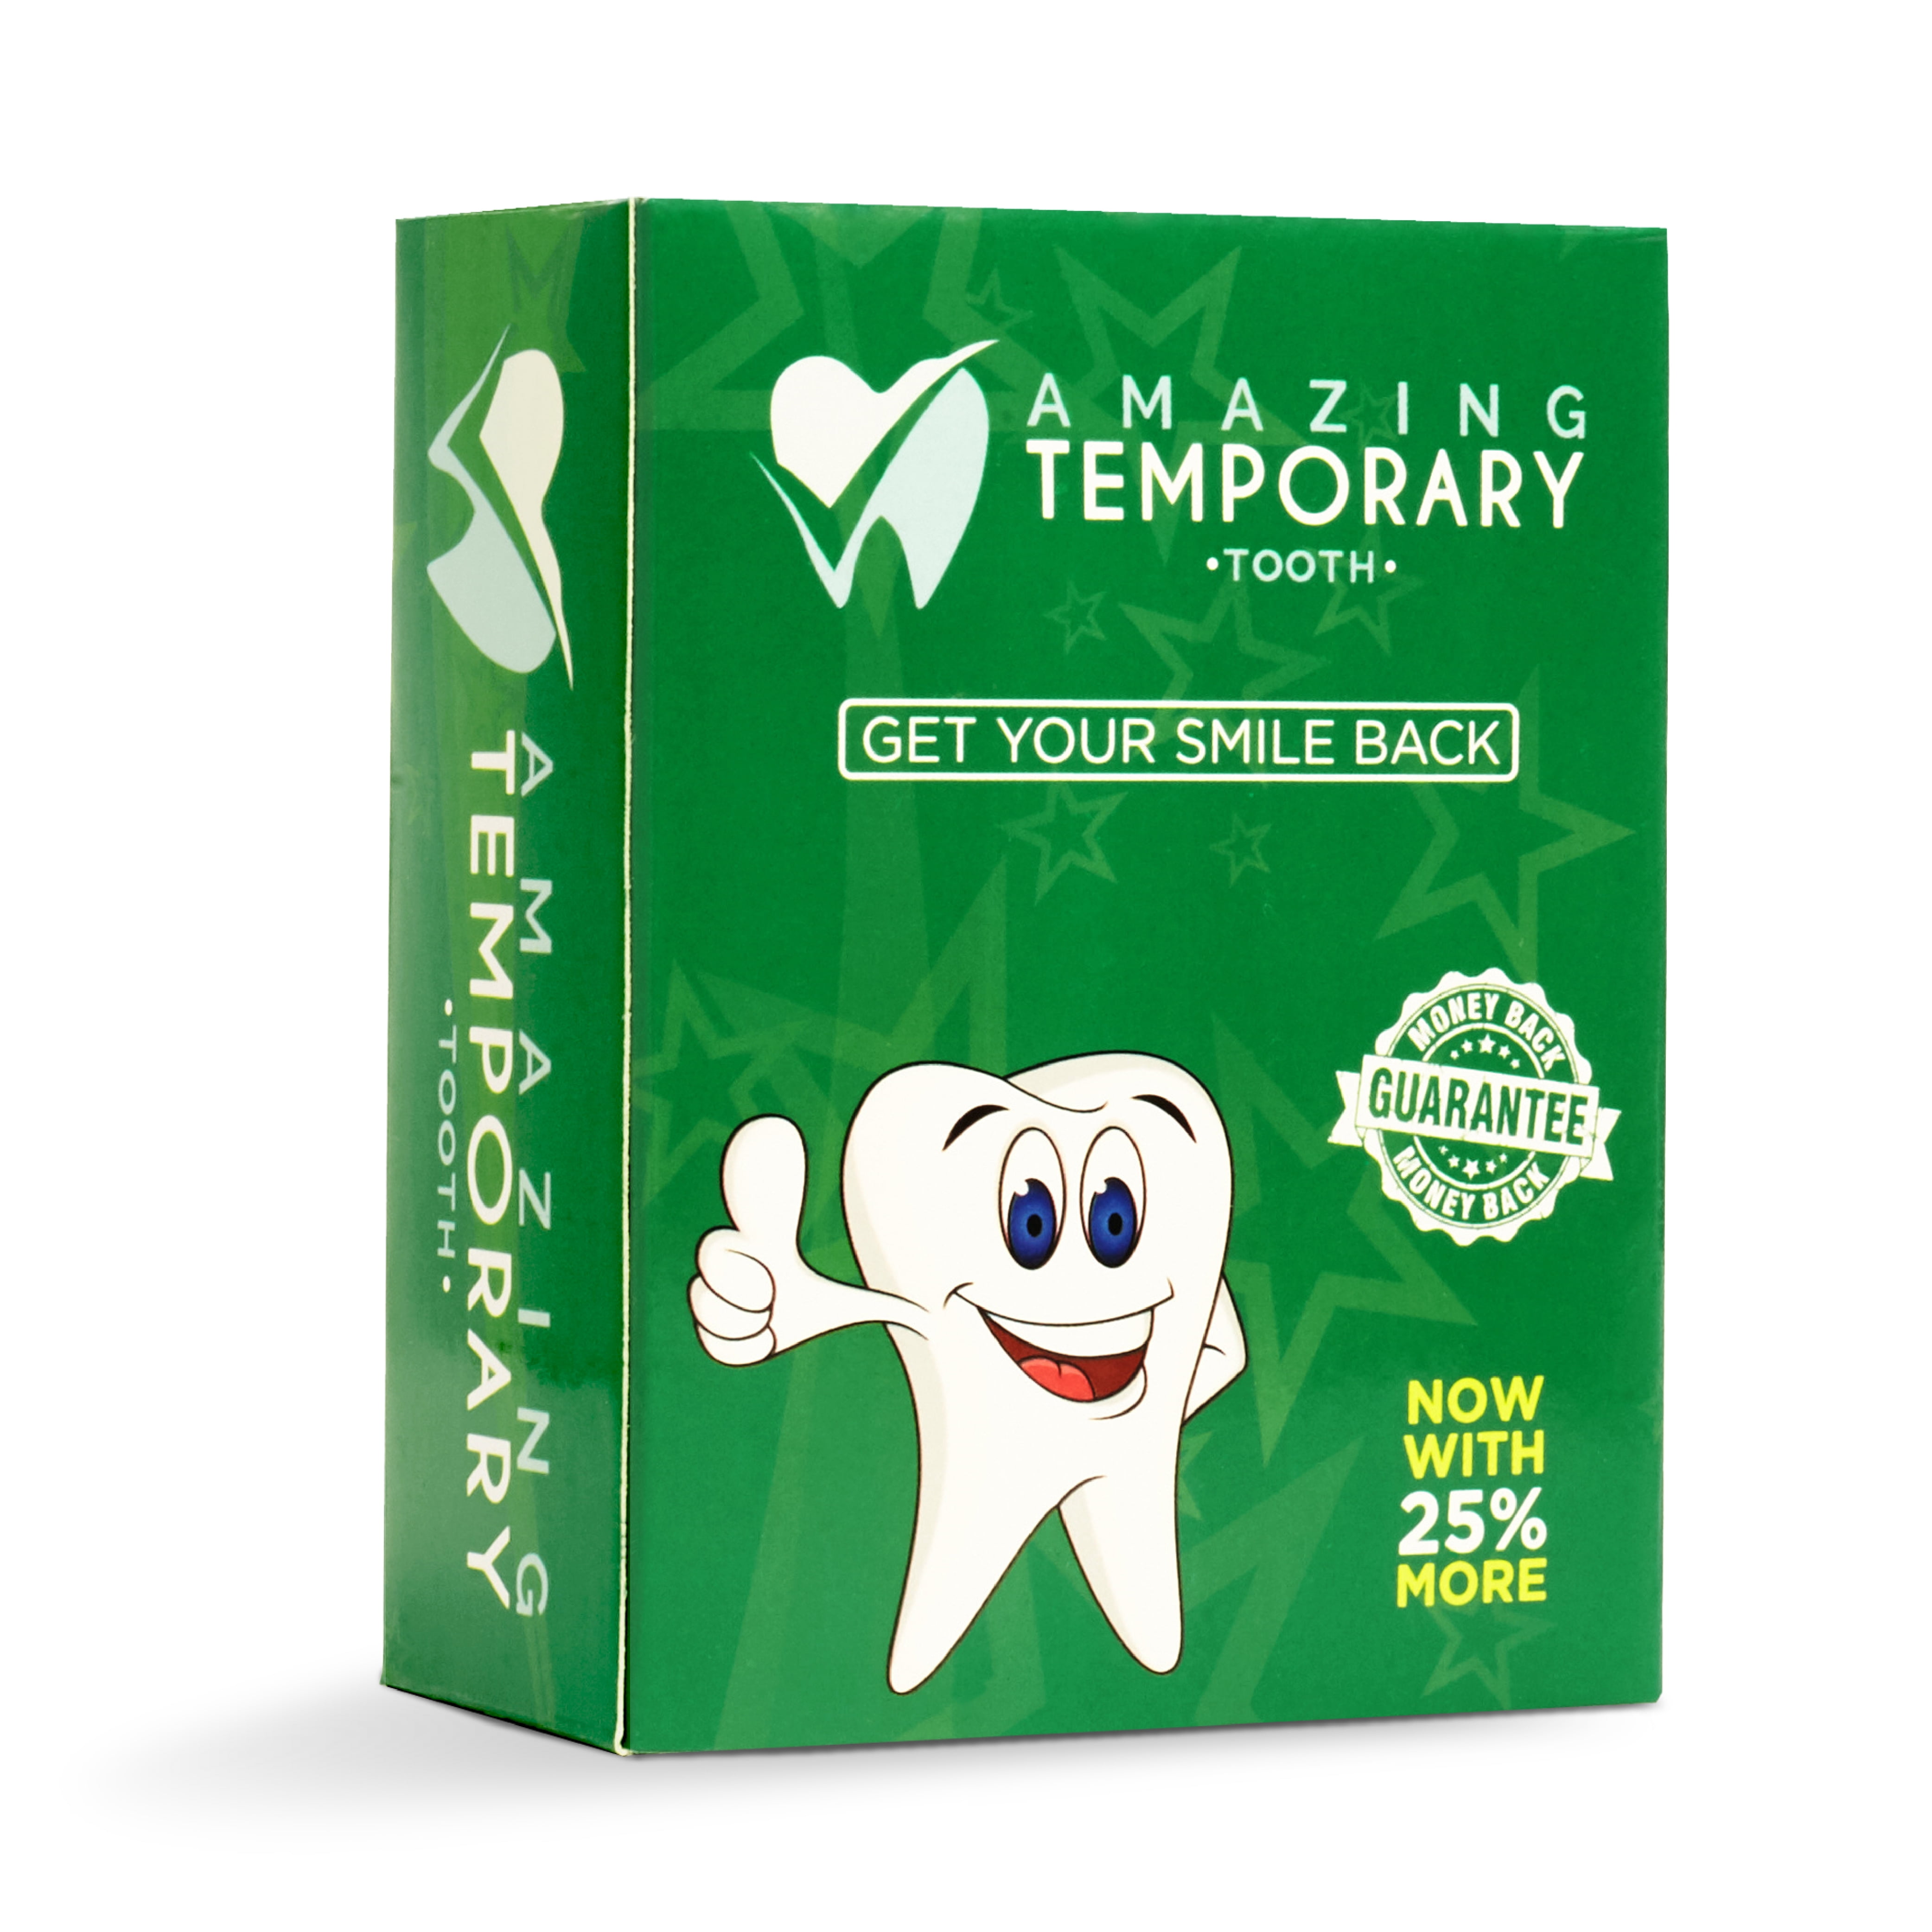 Instant Smile #TemporaryTooth Kit - Replace A #MissingTooth Confidently  #smile for photos, at interviews, family gatherings…